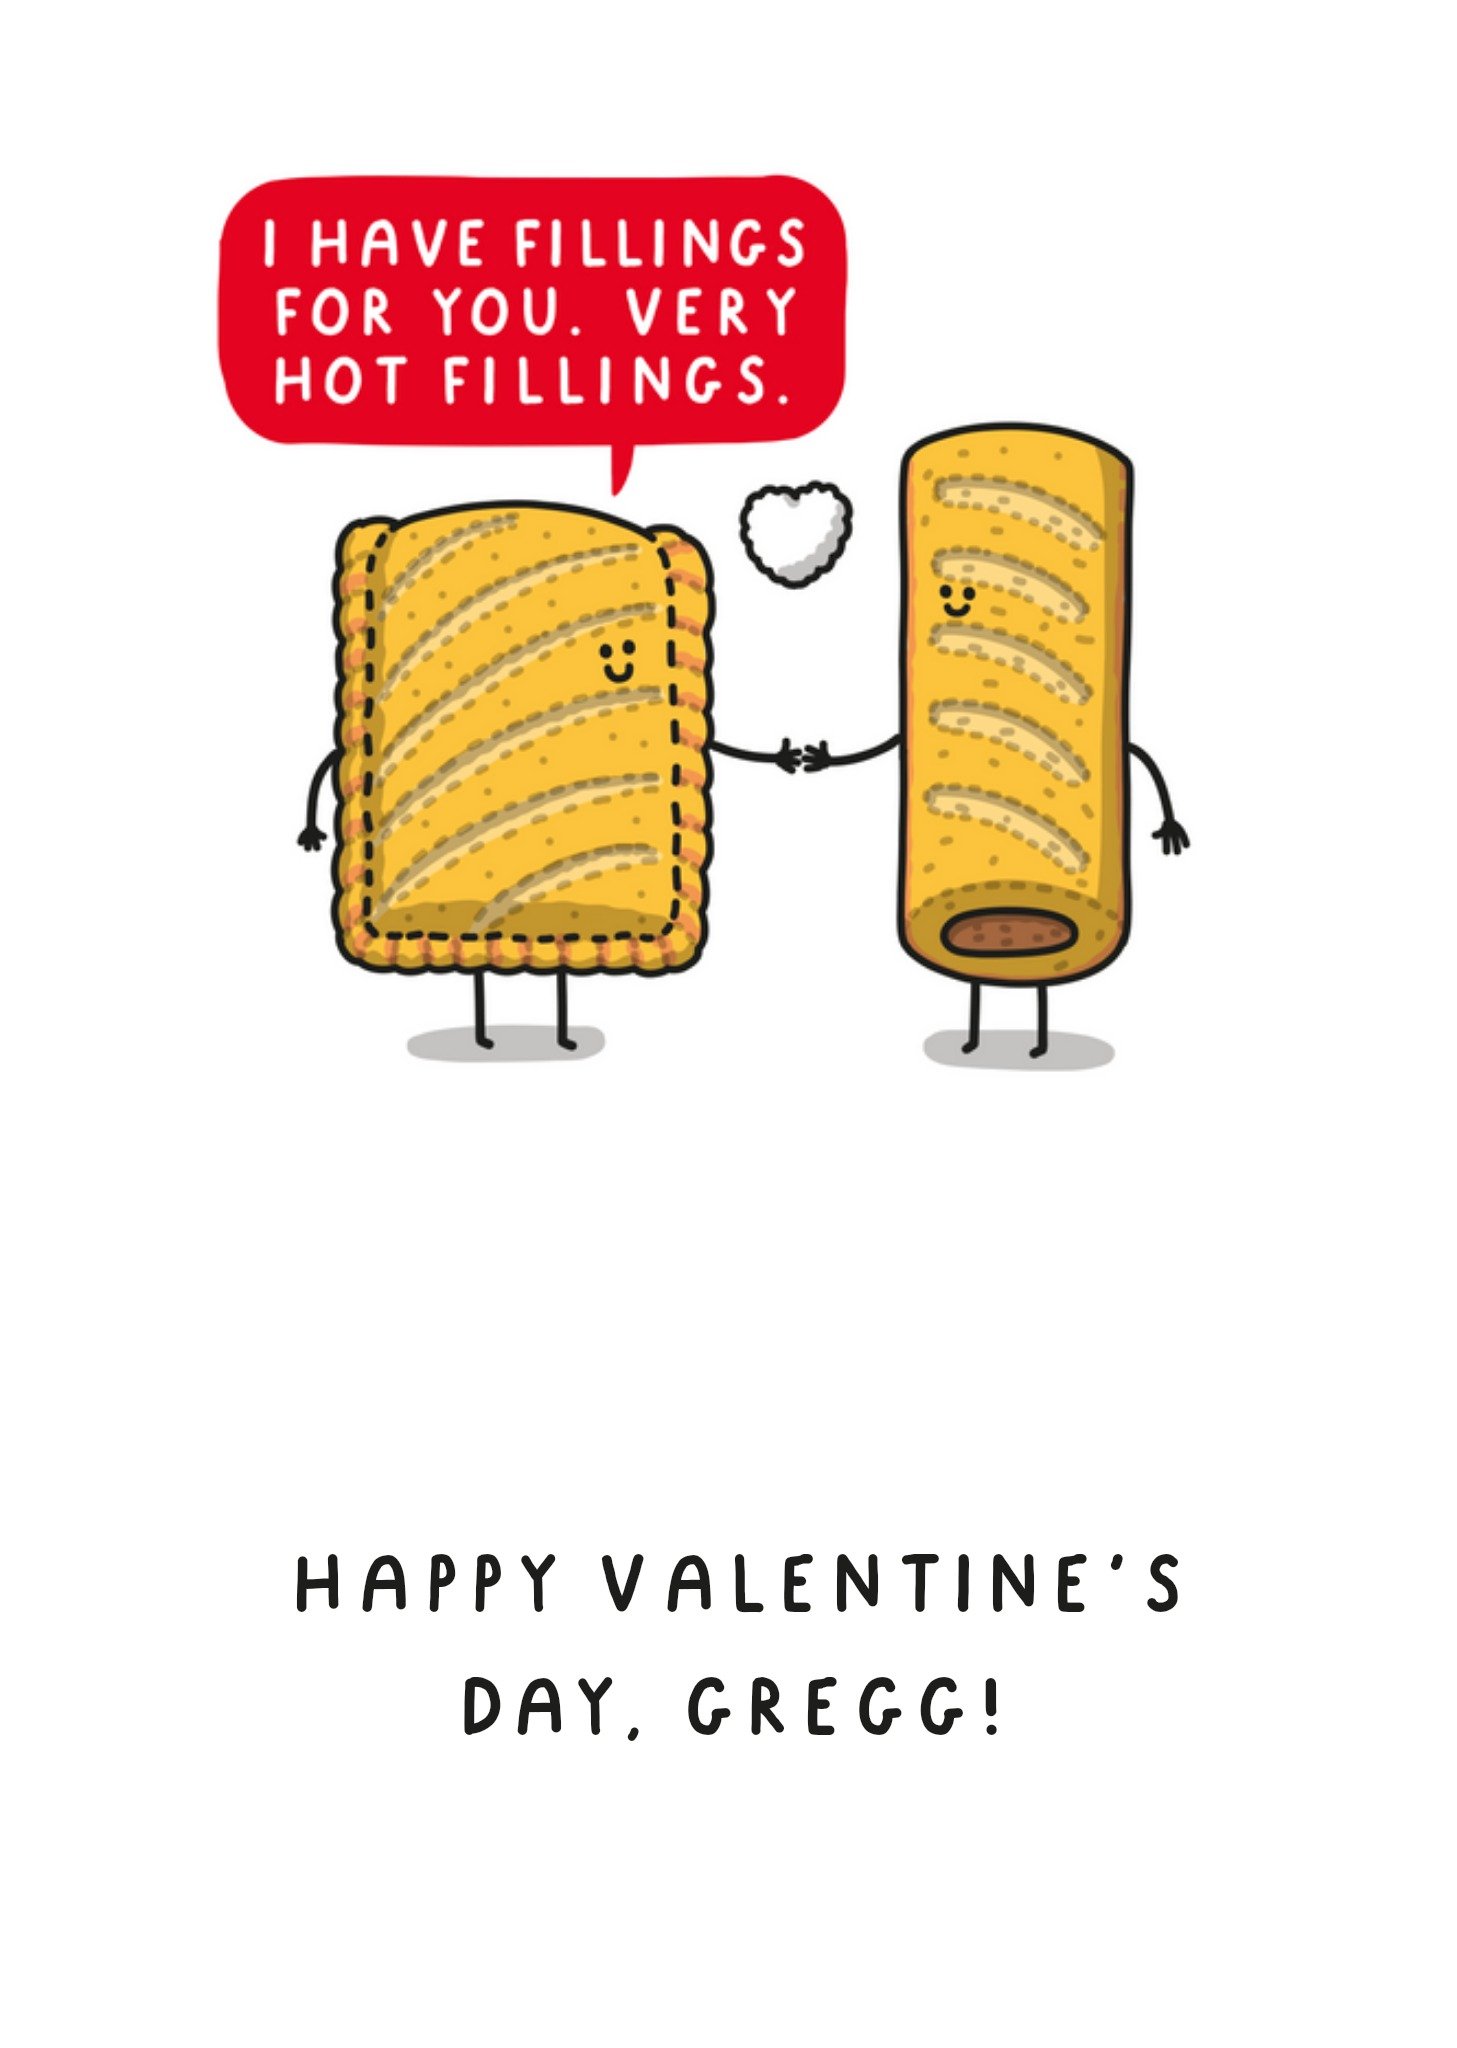 Moonpig Funny I Have Fillings For You Illustrated Cartoon Sausage Rolls Valentine's Day Card Ecard